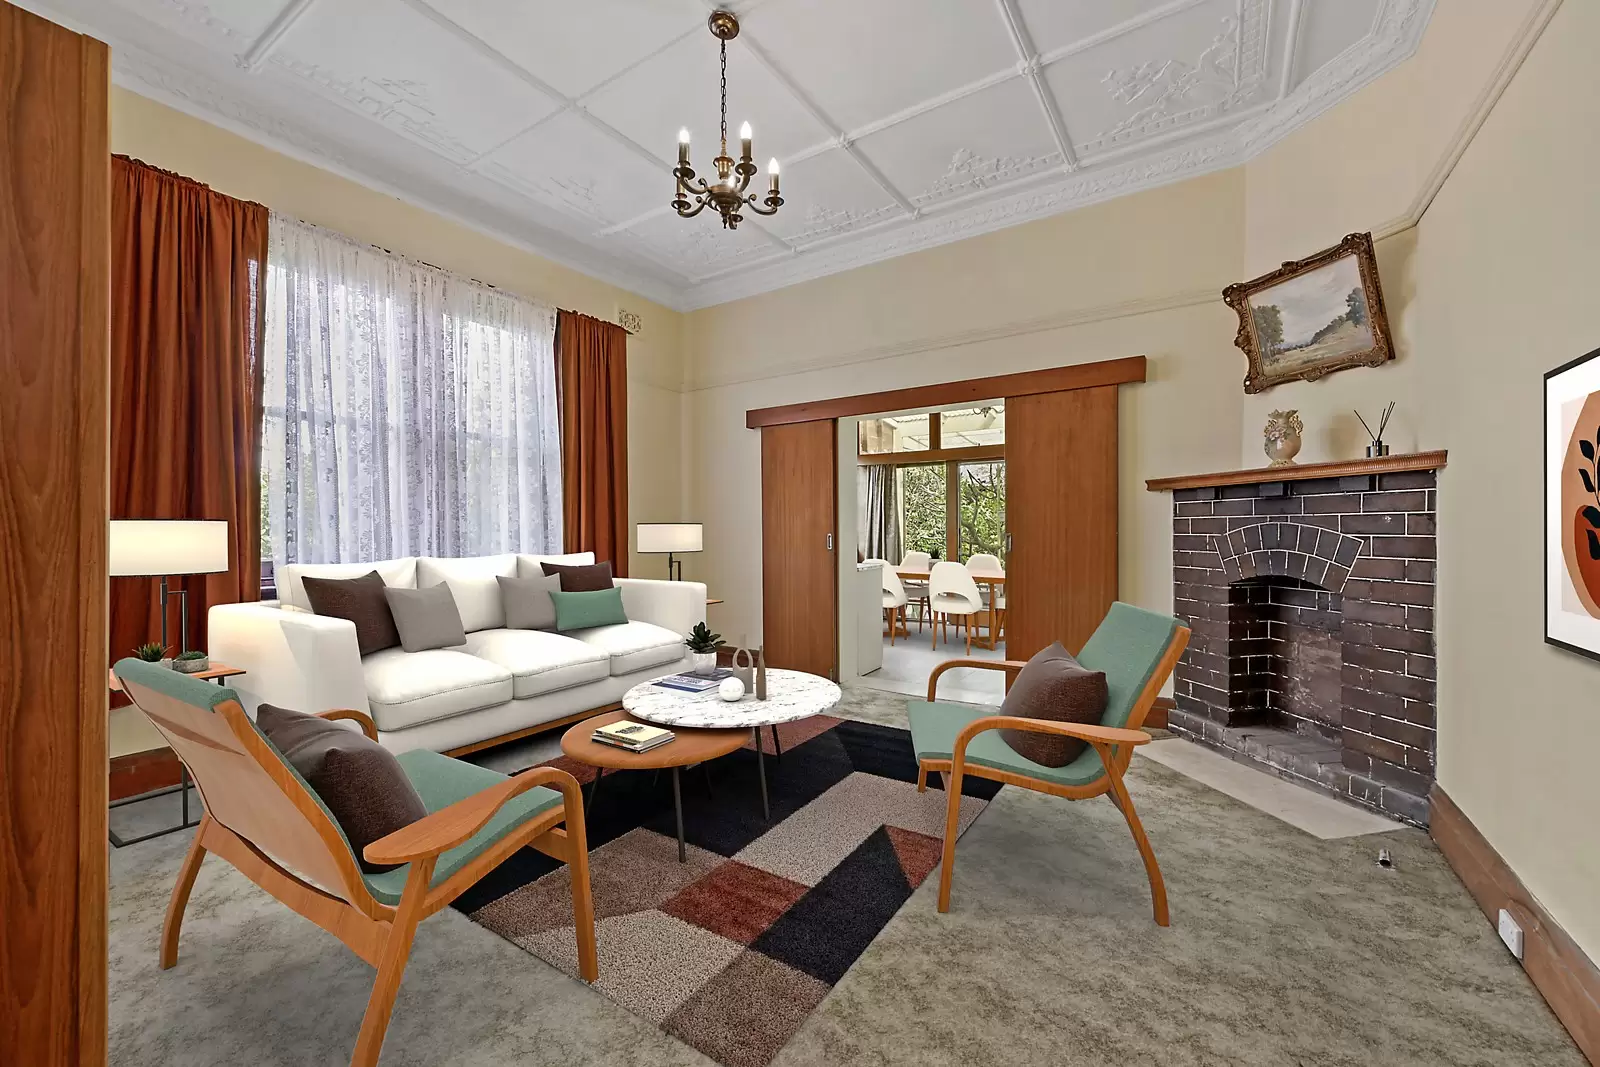 Photo #6: 30 Mount Street, Coogee - Sold by Sydney Sotheby's International Realty